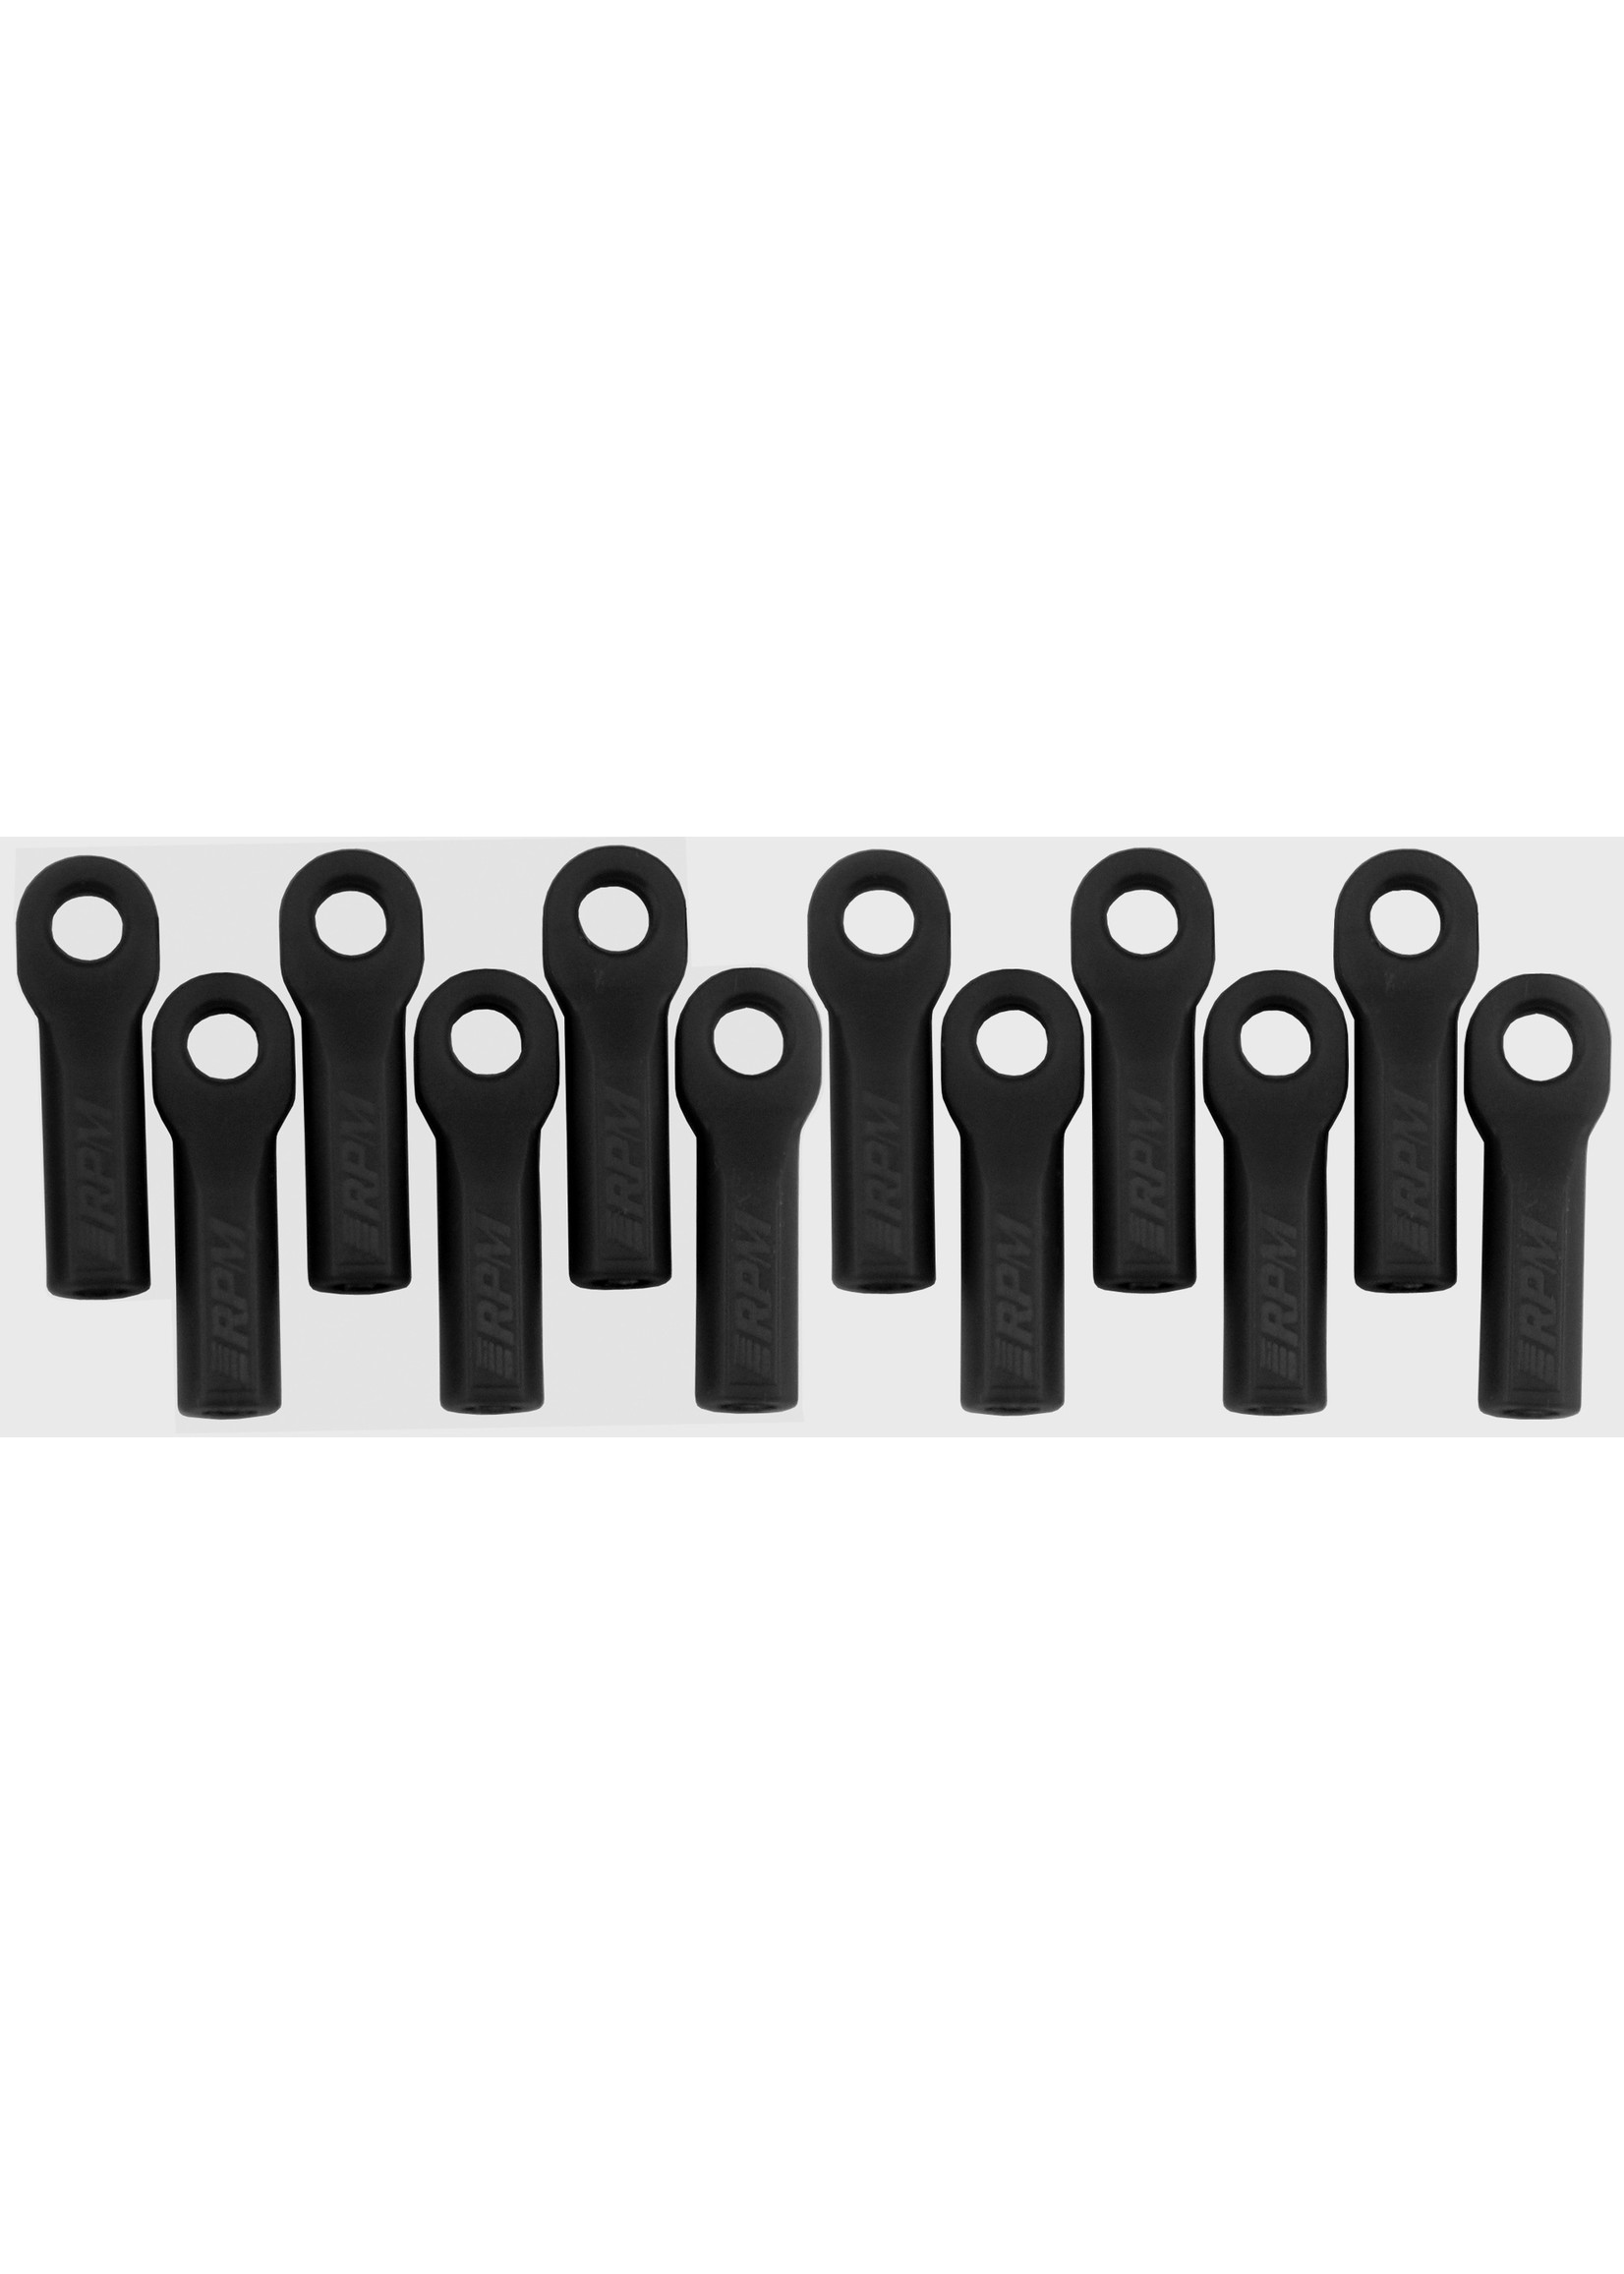 RPM 80512 - Long Rod Ends for Traxxas 1/10 - Black (12)